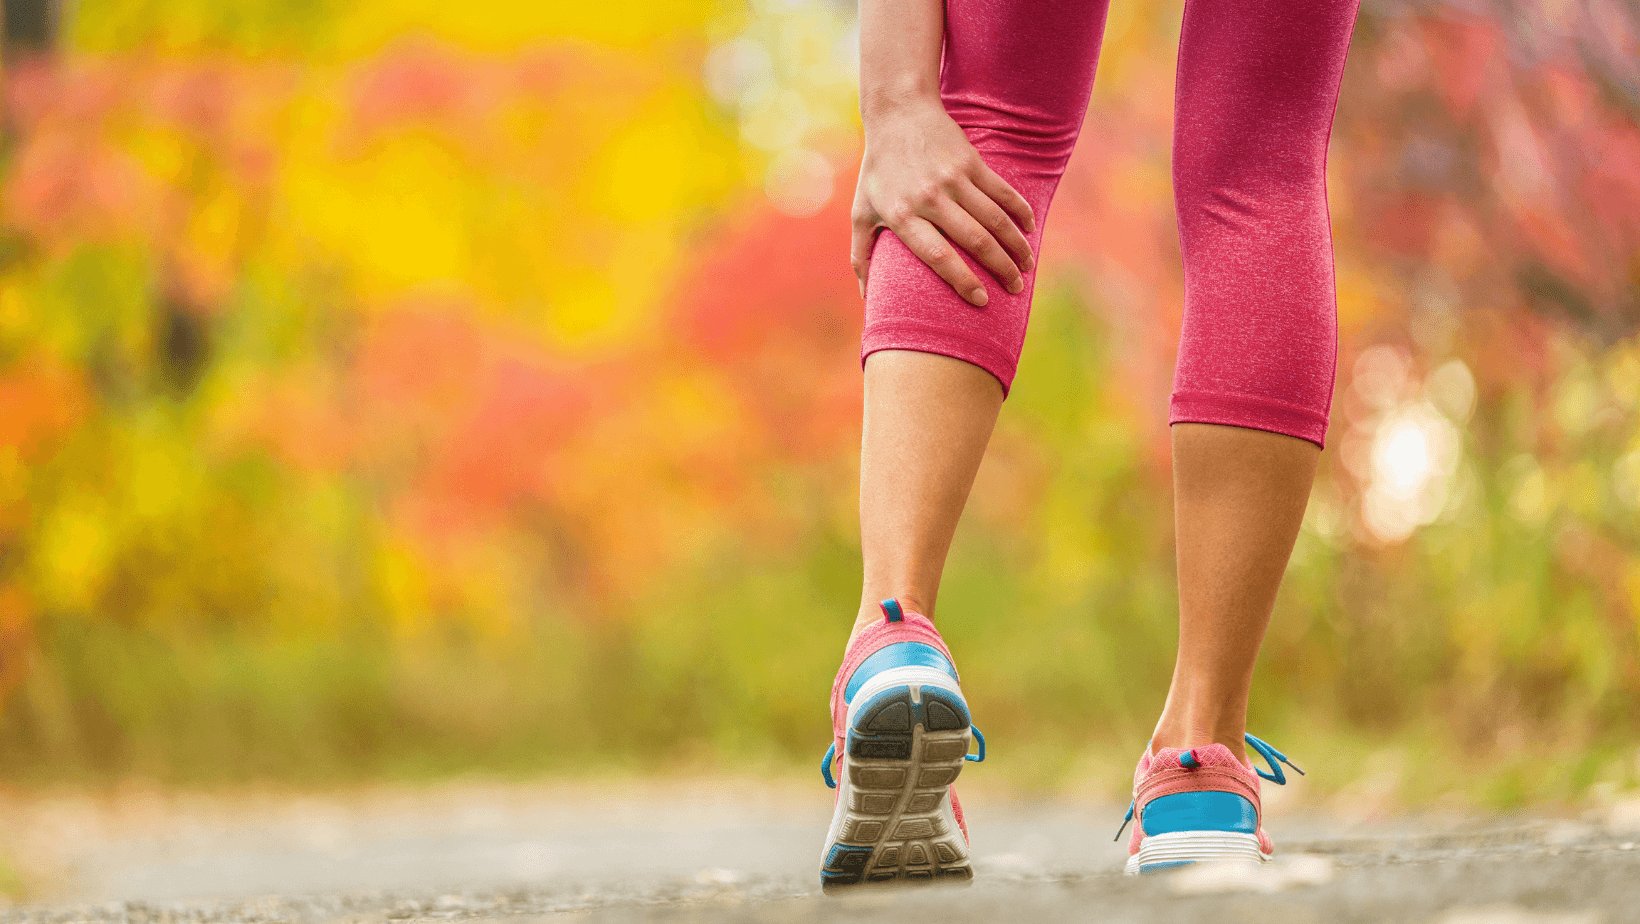 woman walking and reaching down to soothe muscle cramp